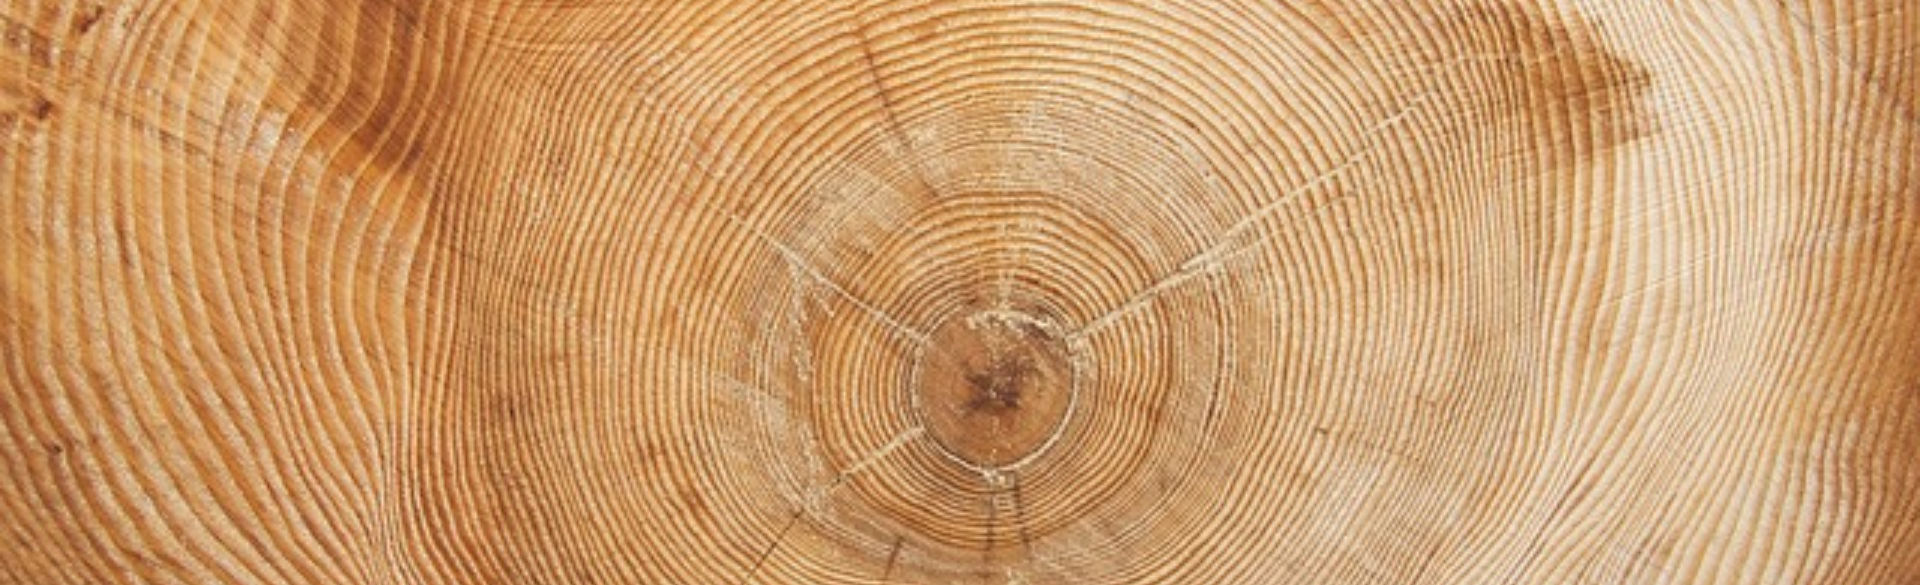 An image of tree rings.